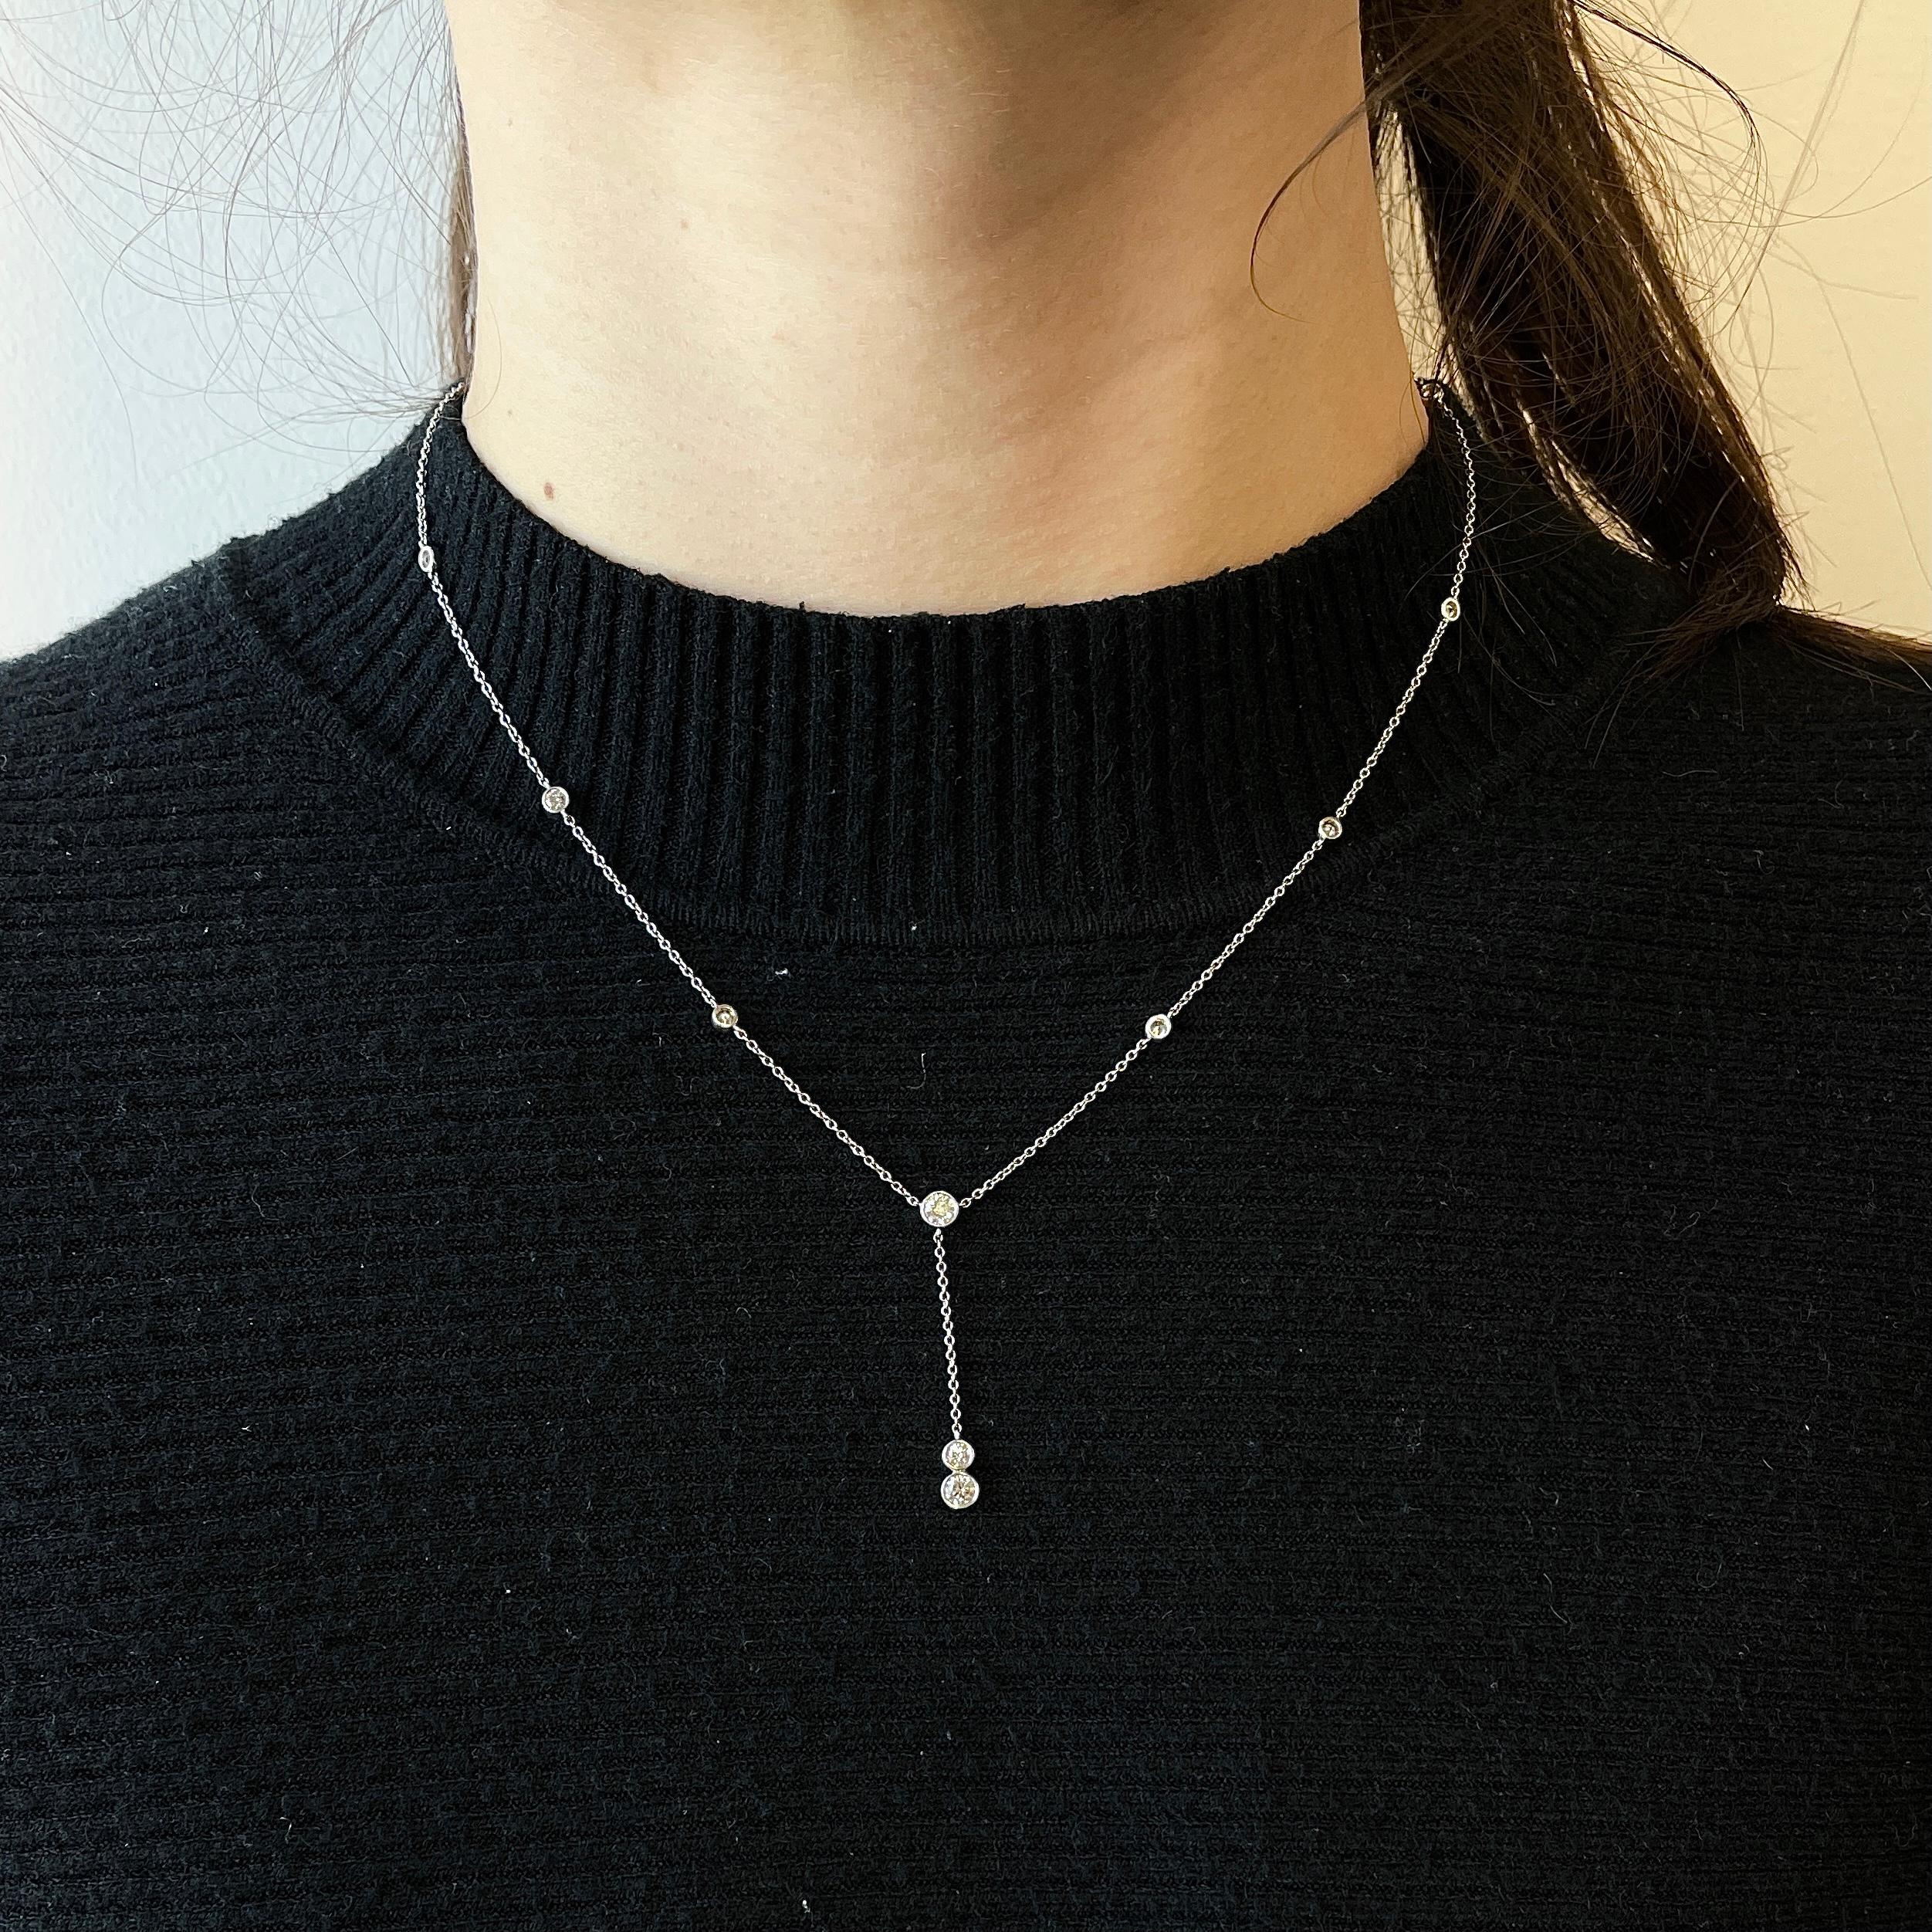 Fashion is subtle, effortless and elegant. If done right it should never go out of style and should be for every occasion. This Diamonds by the Yard necklace is especially desirable since its Vintage Tiffany & Co. Drop Pendant Necklace. The necklace